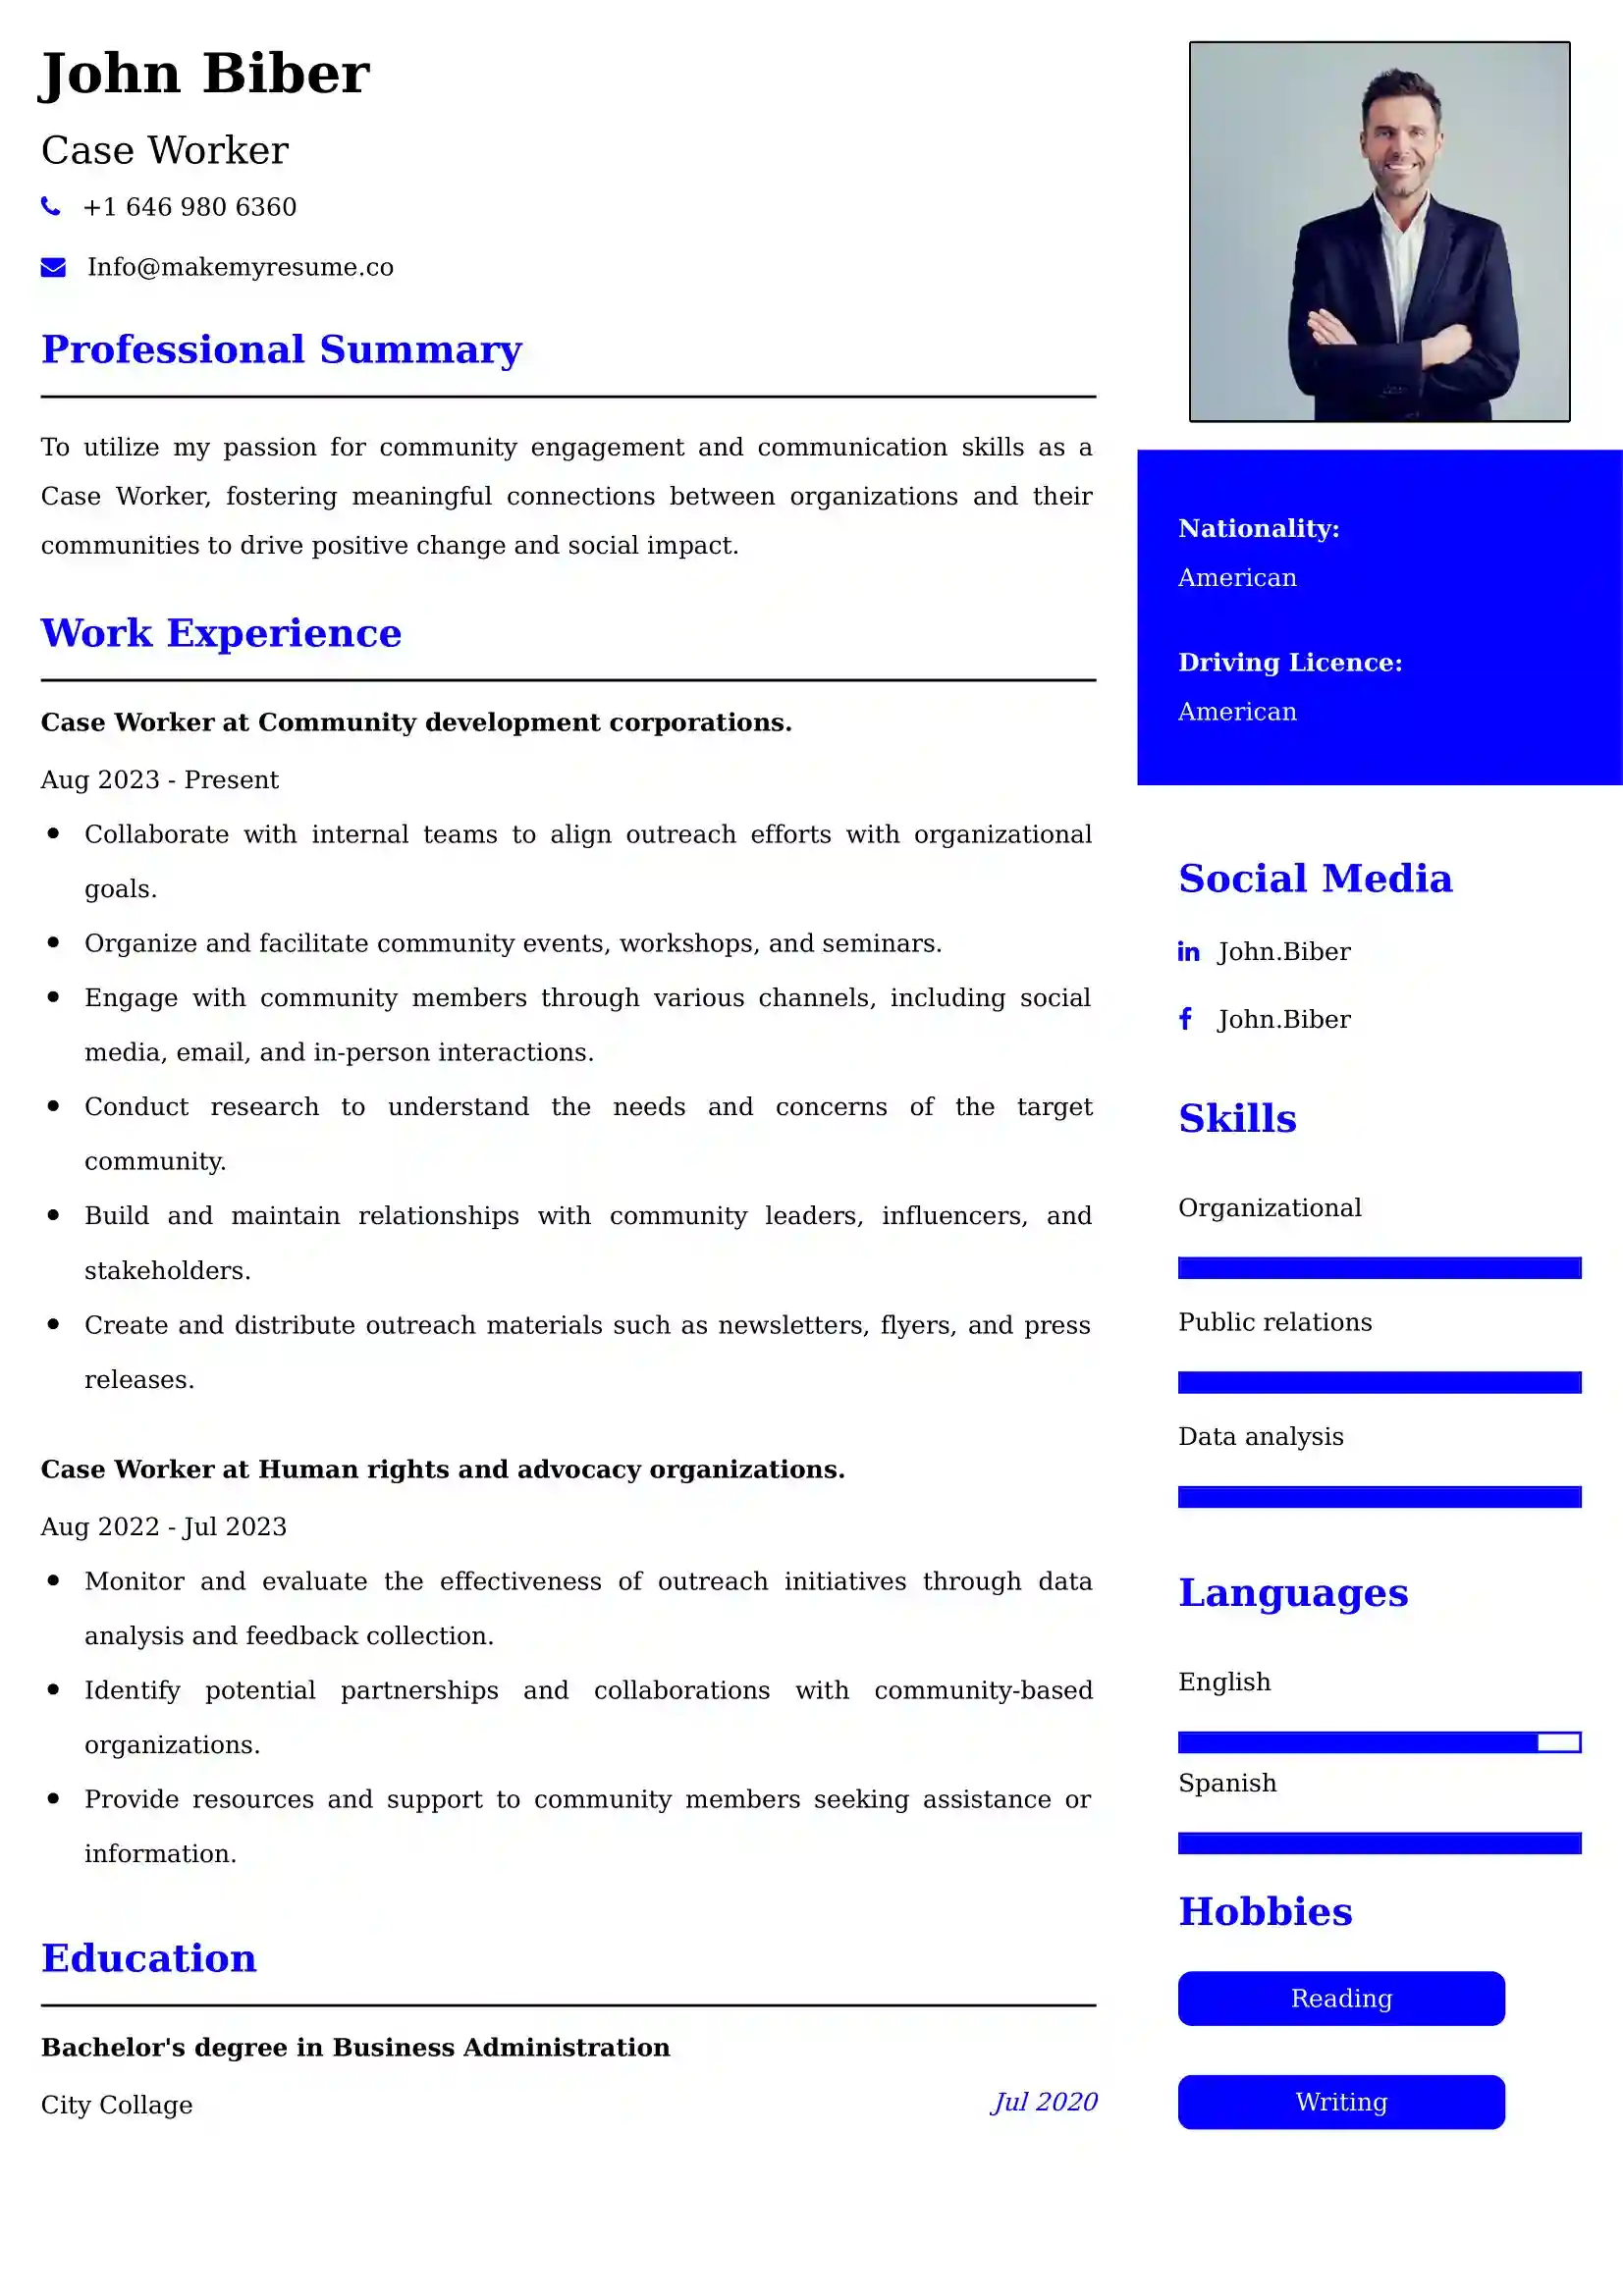 Case Worker Resume Examples - UK Format, Latest Template.